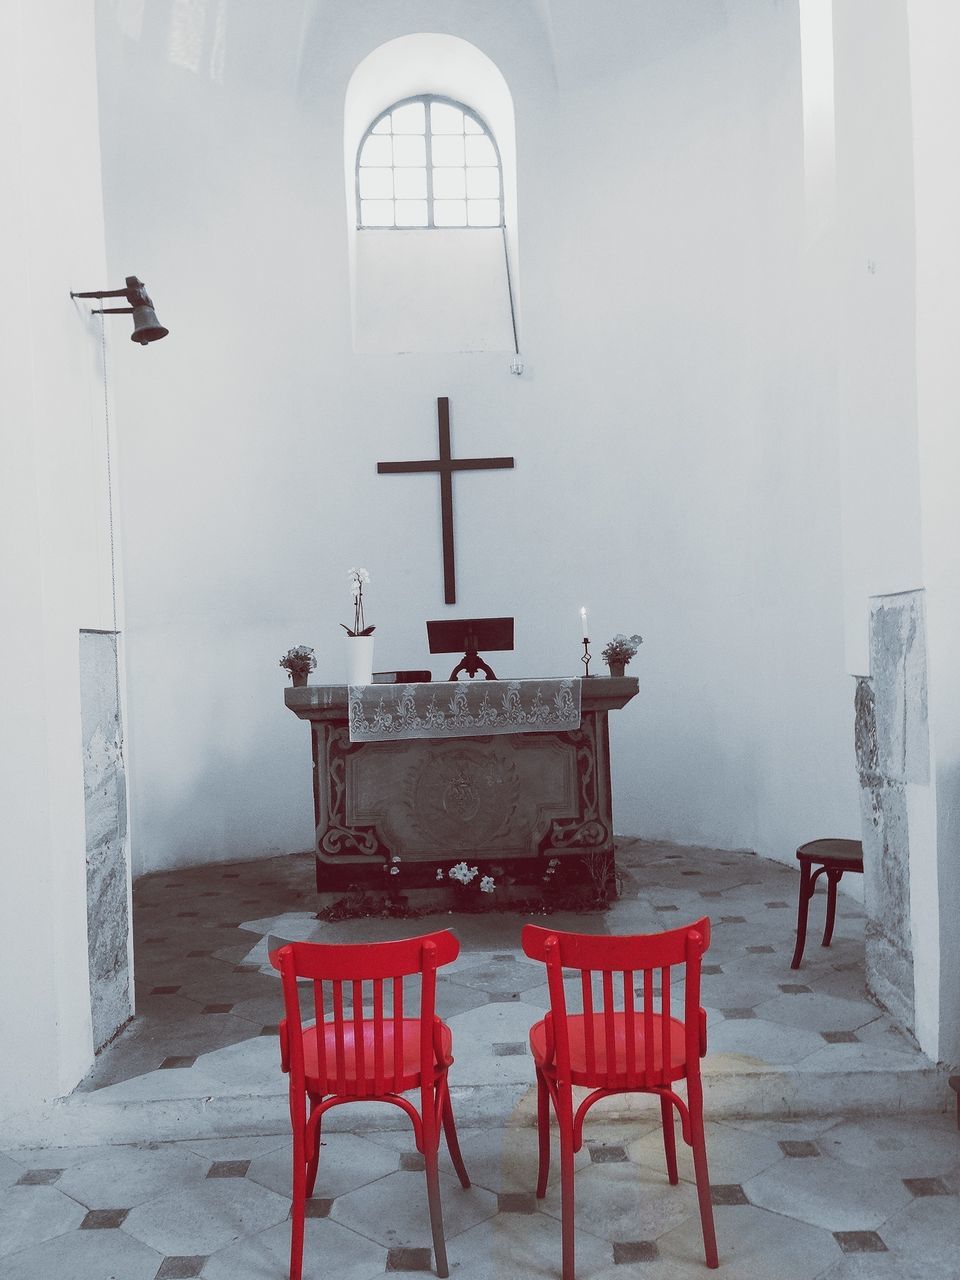 built structure, architecture, chair, door, indoors, bench, building exterior, entrance, religion, red, empty, day, place of worship, absence, wall - building feature, window, closed, church, wall